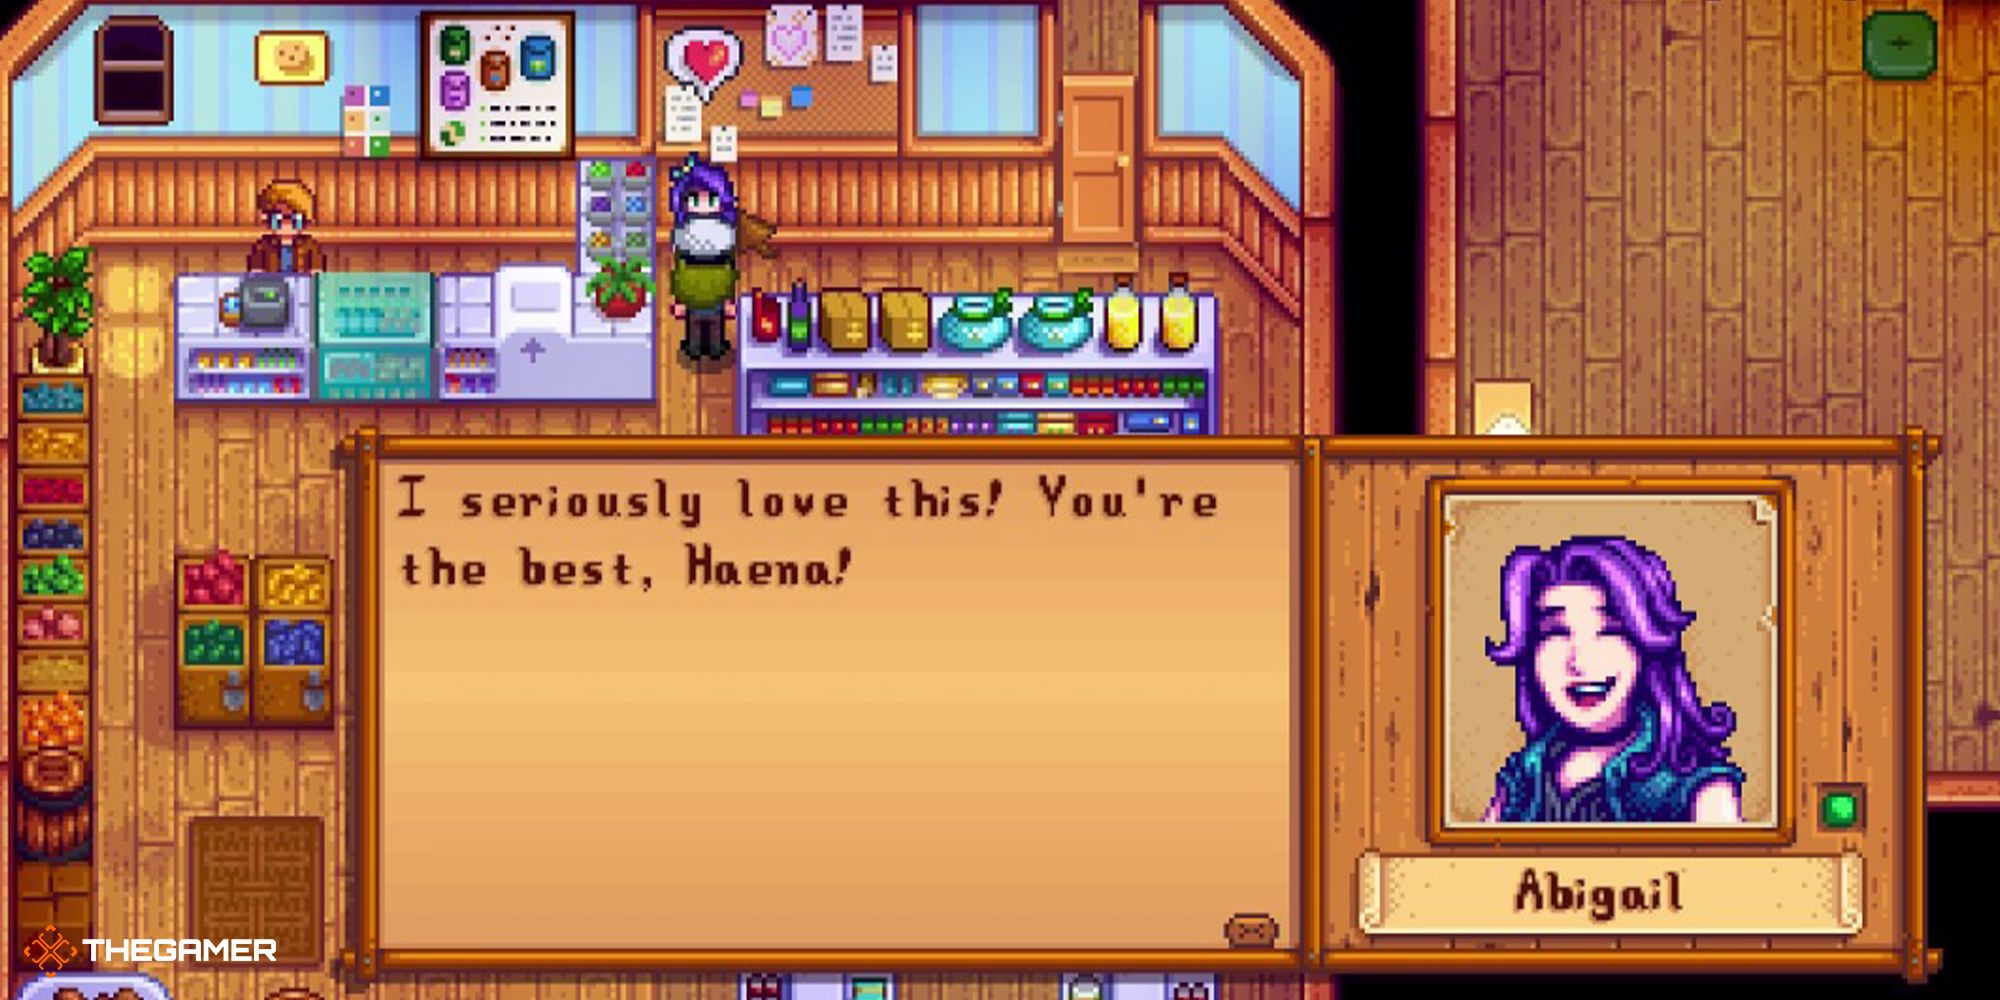 stardew valley - abigail loves your gift